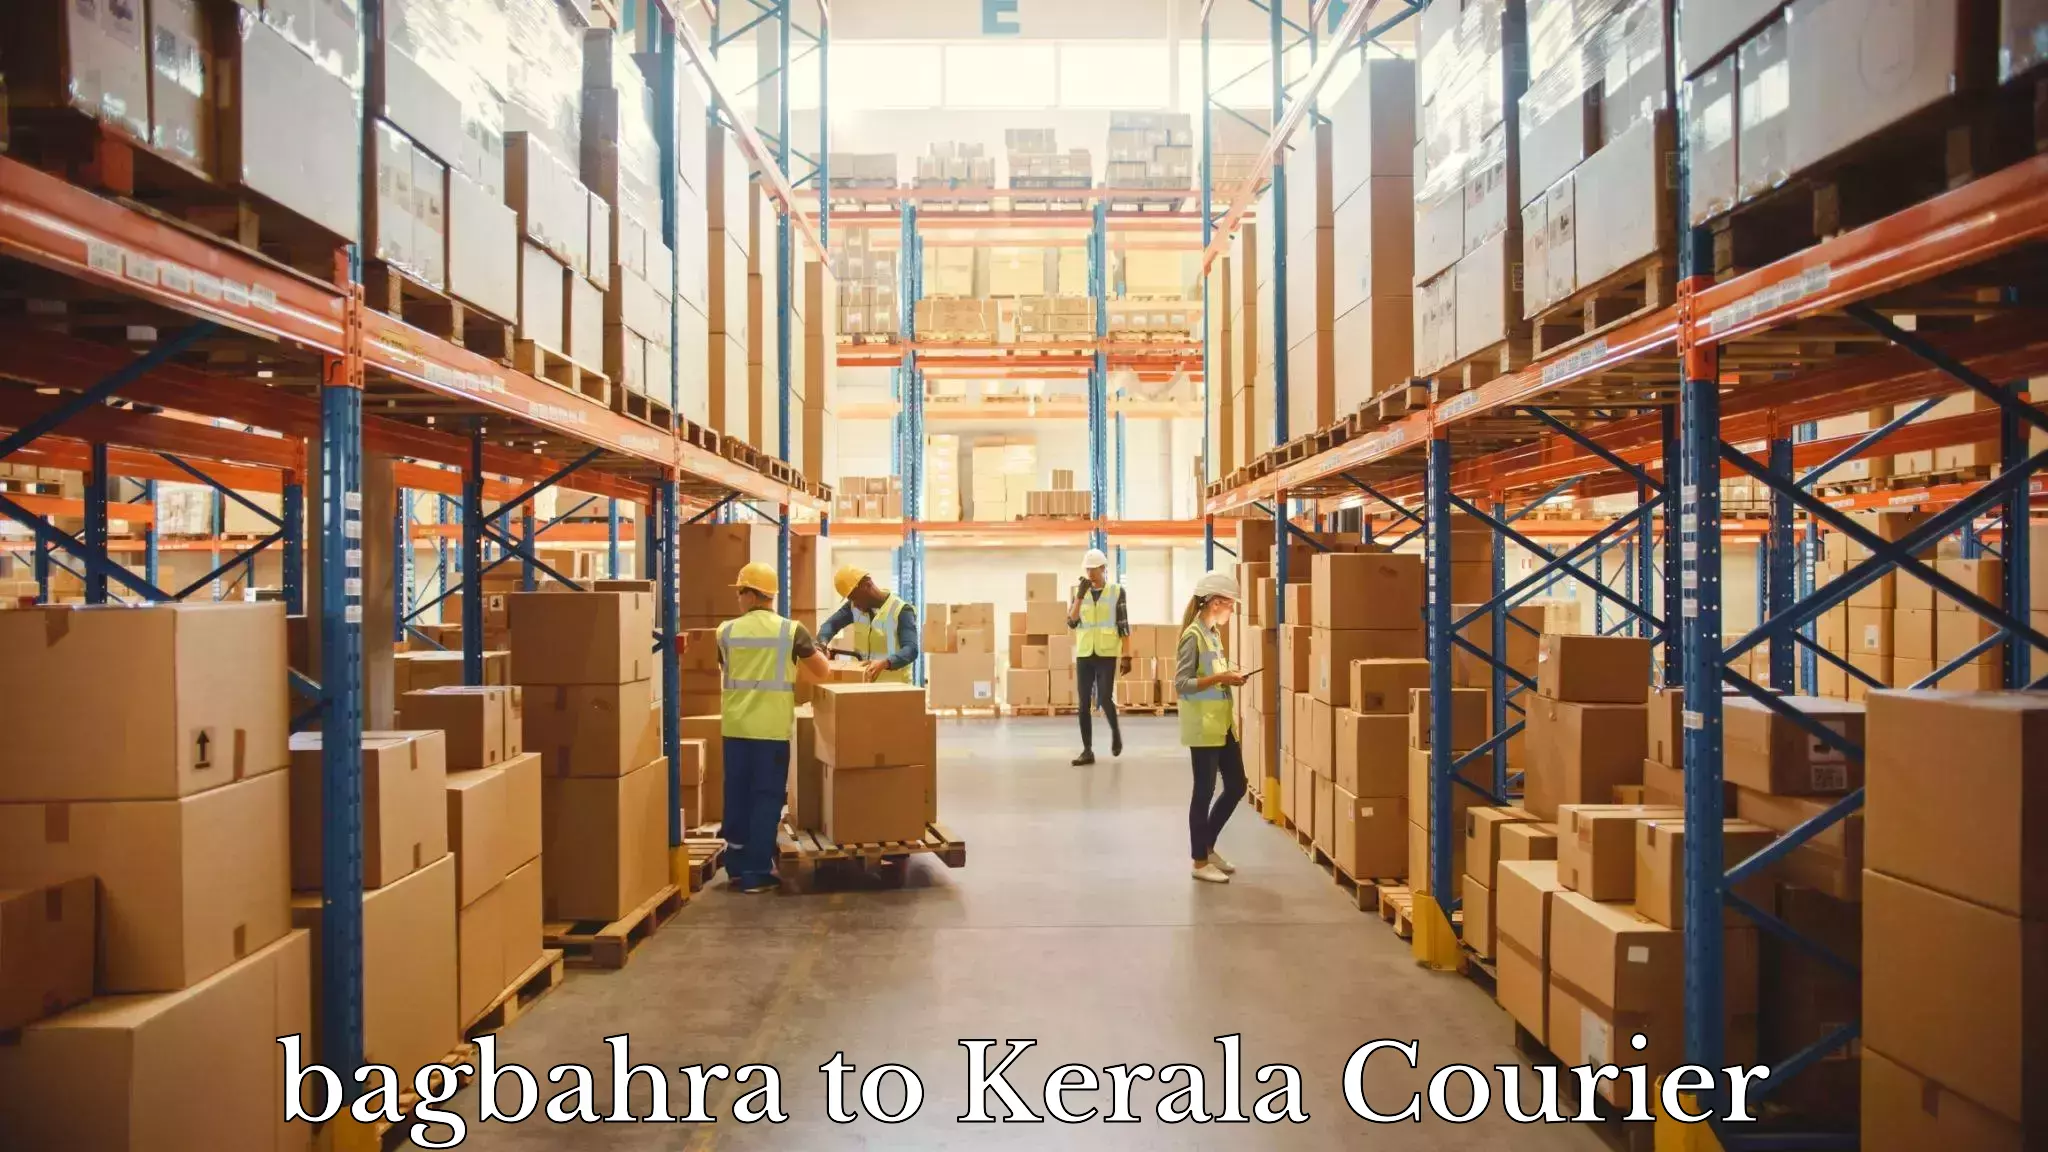 International courier networks in bagbahra to Kalpetta